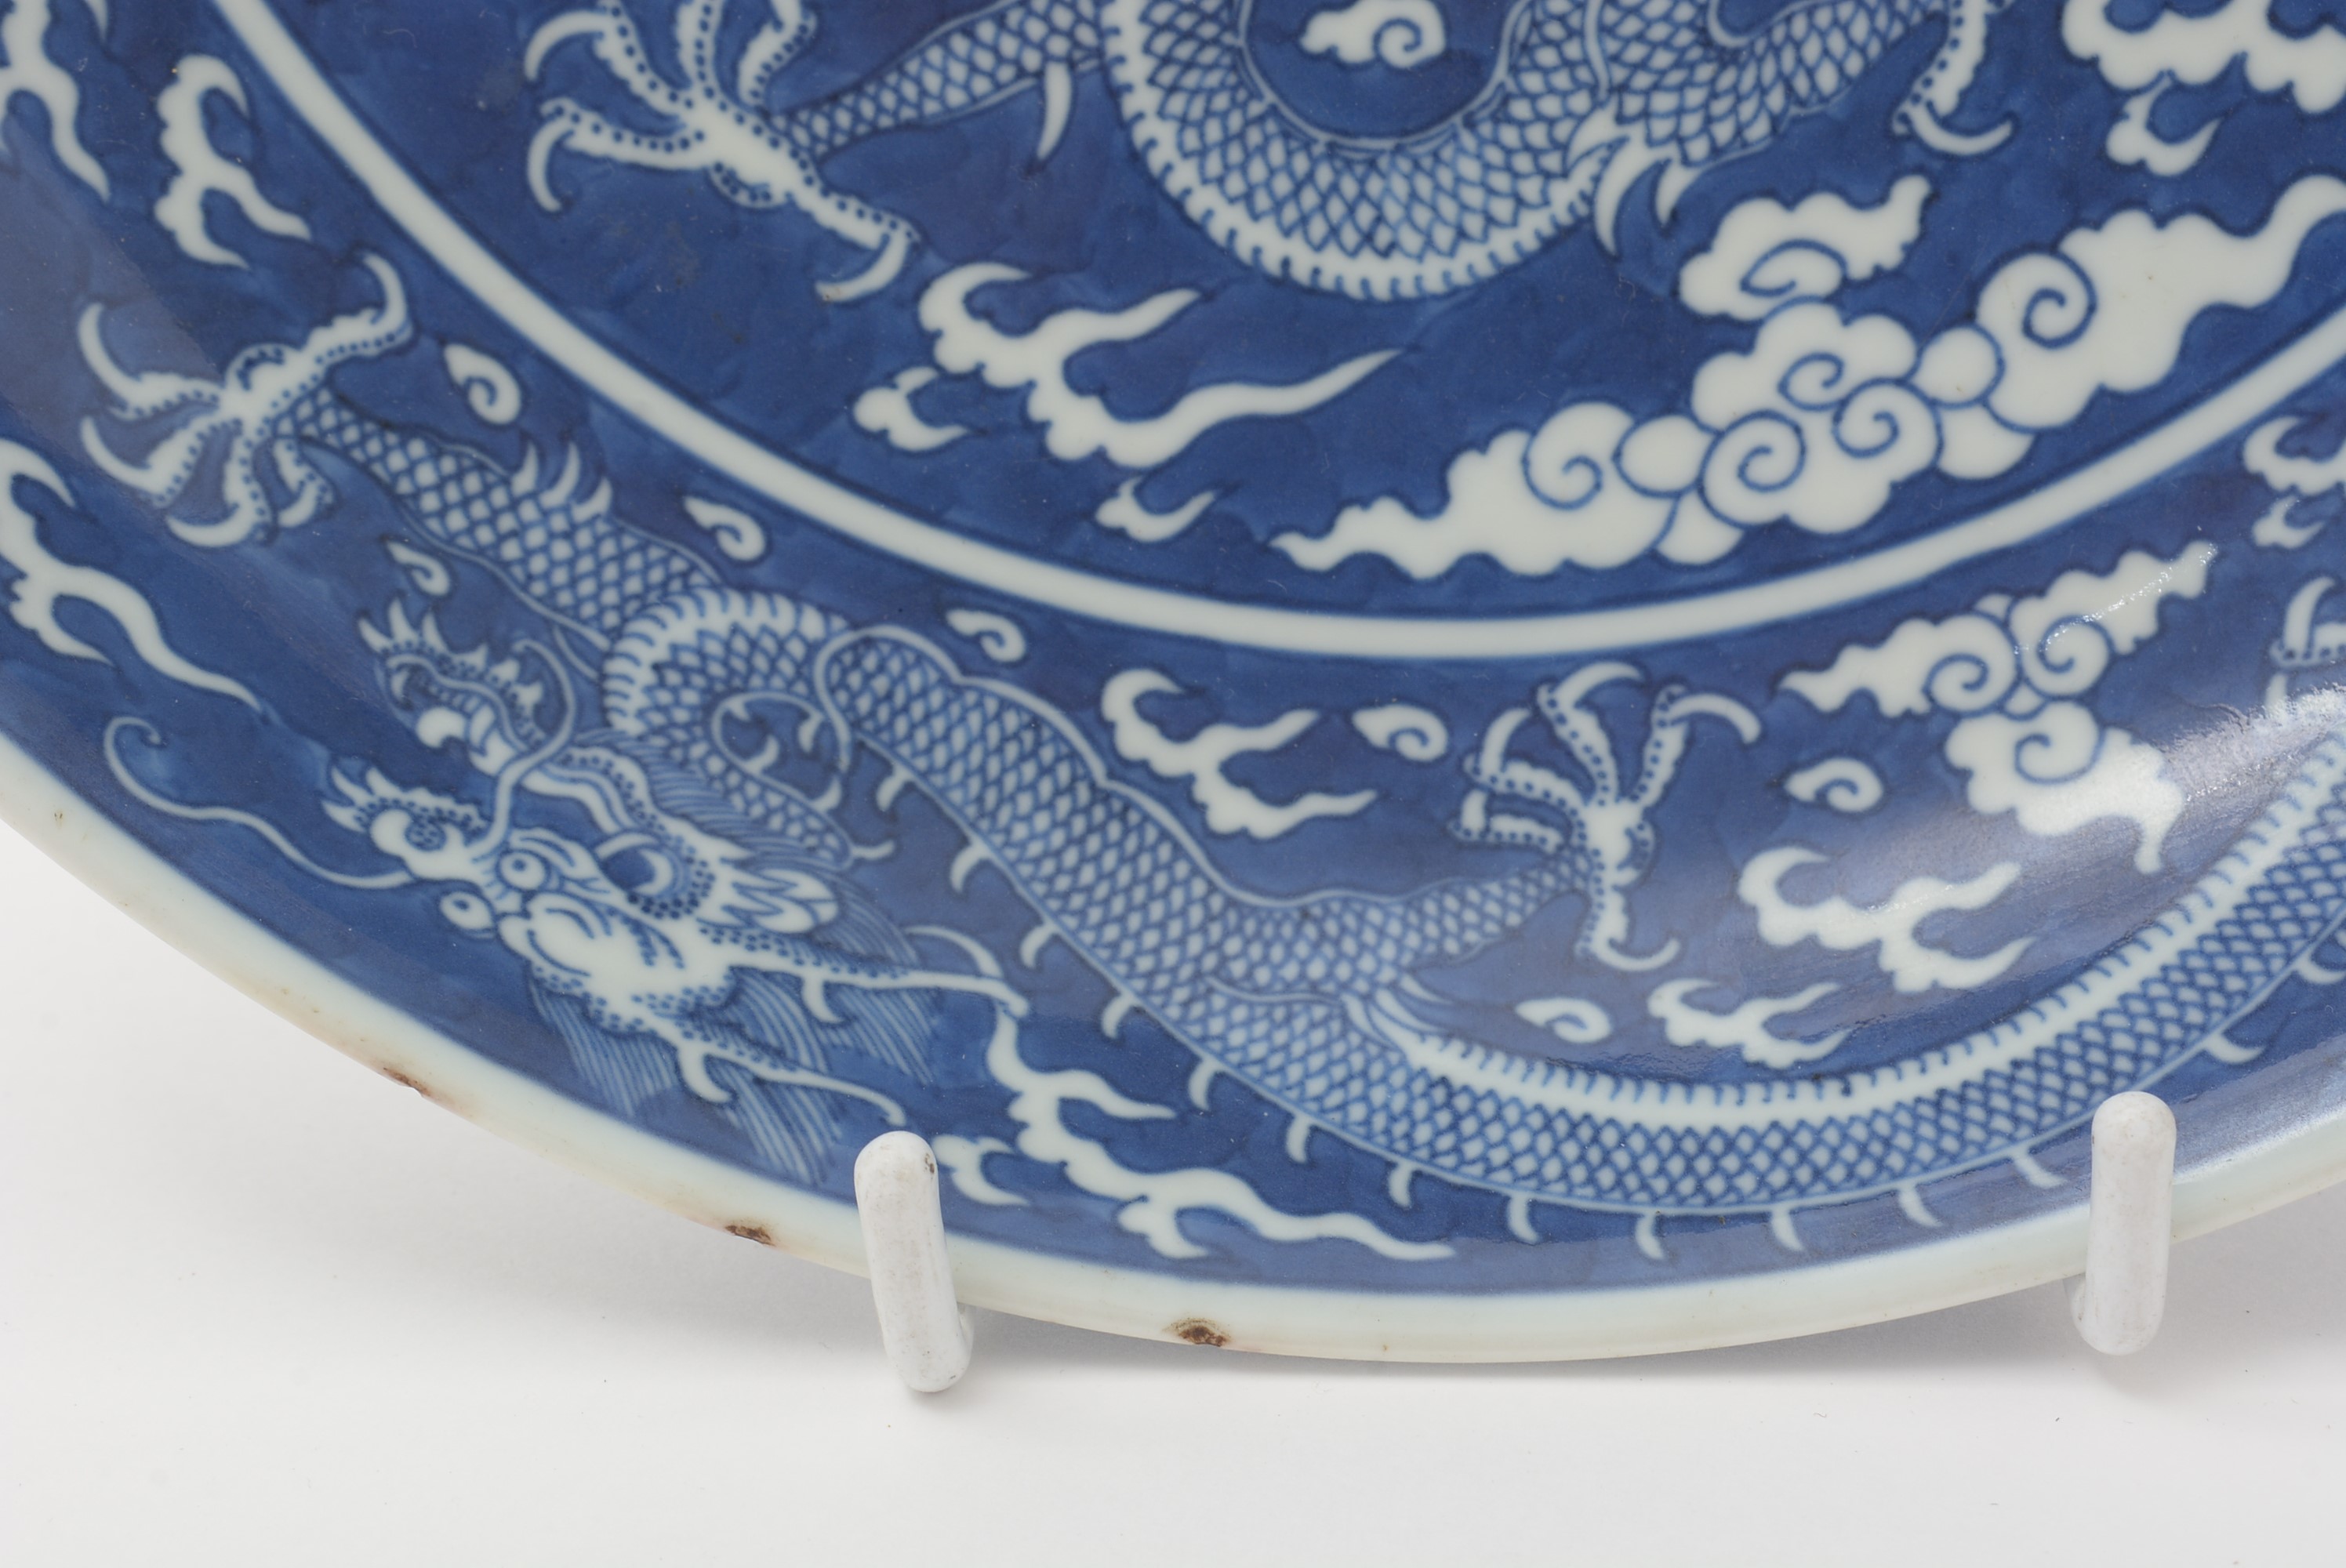 Ching Dragon Lapis Blue Salad Plate by Fitz & Floyd